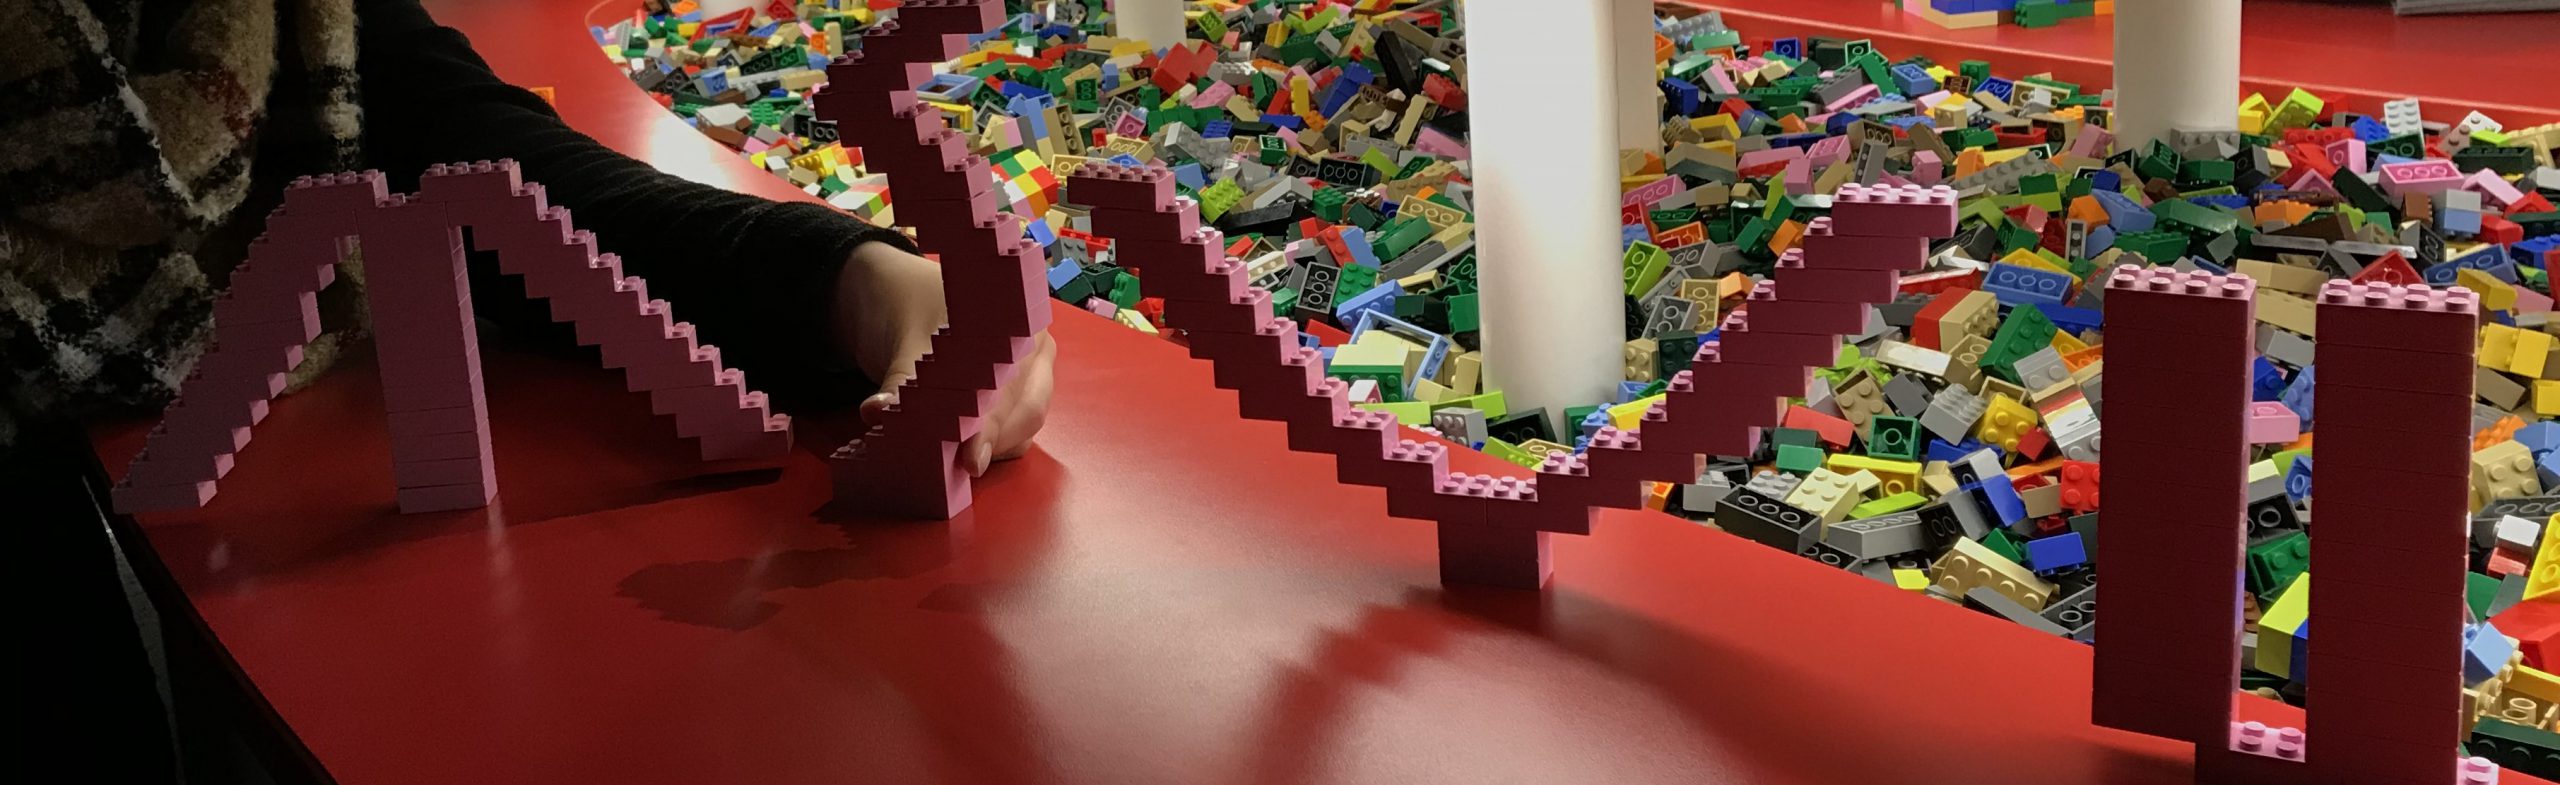 Lego made into the initials M S V U by students during their 2018 local entrepreneur and cultural tourism tour at the Discovery Centre